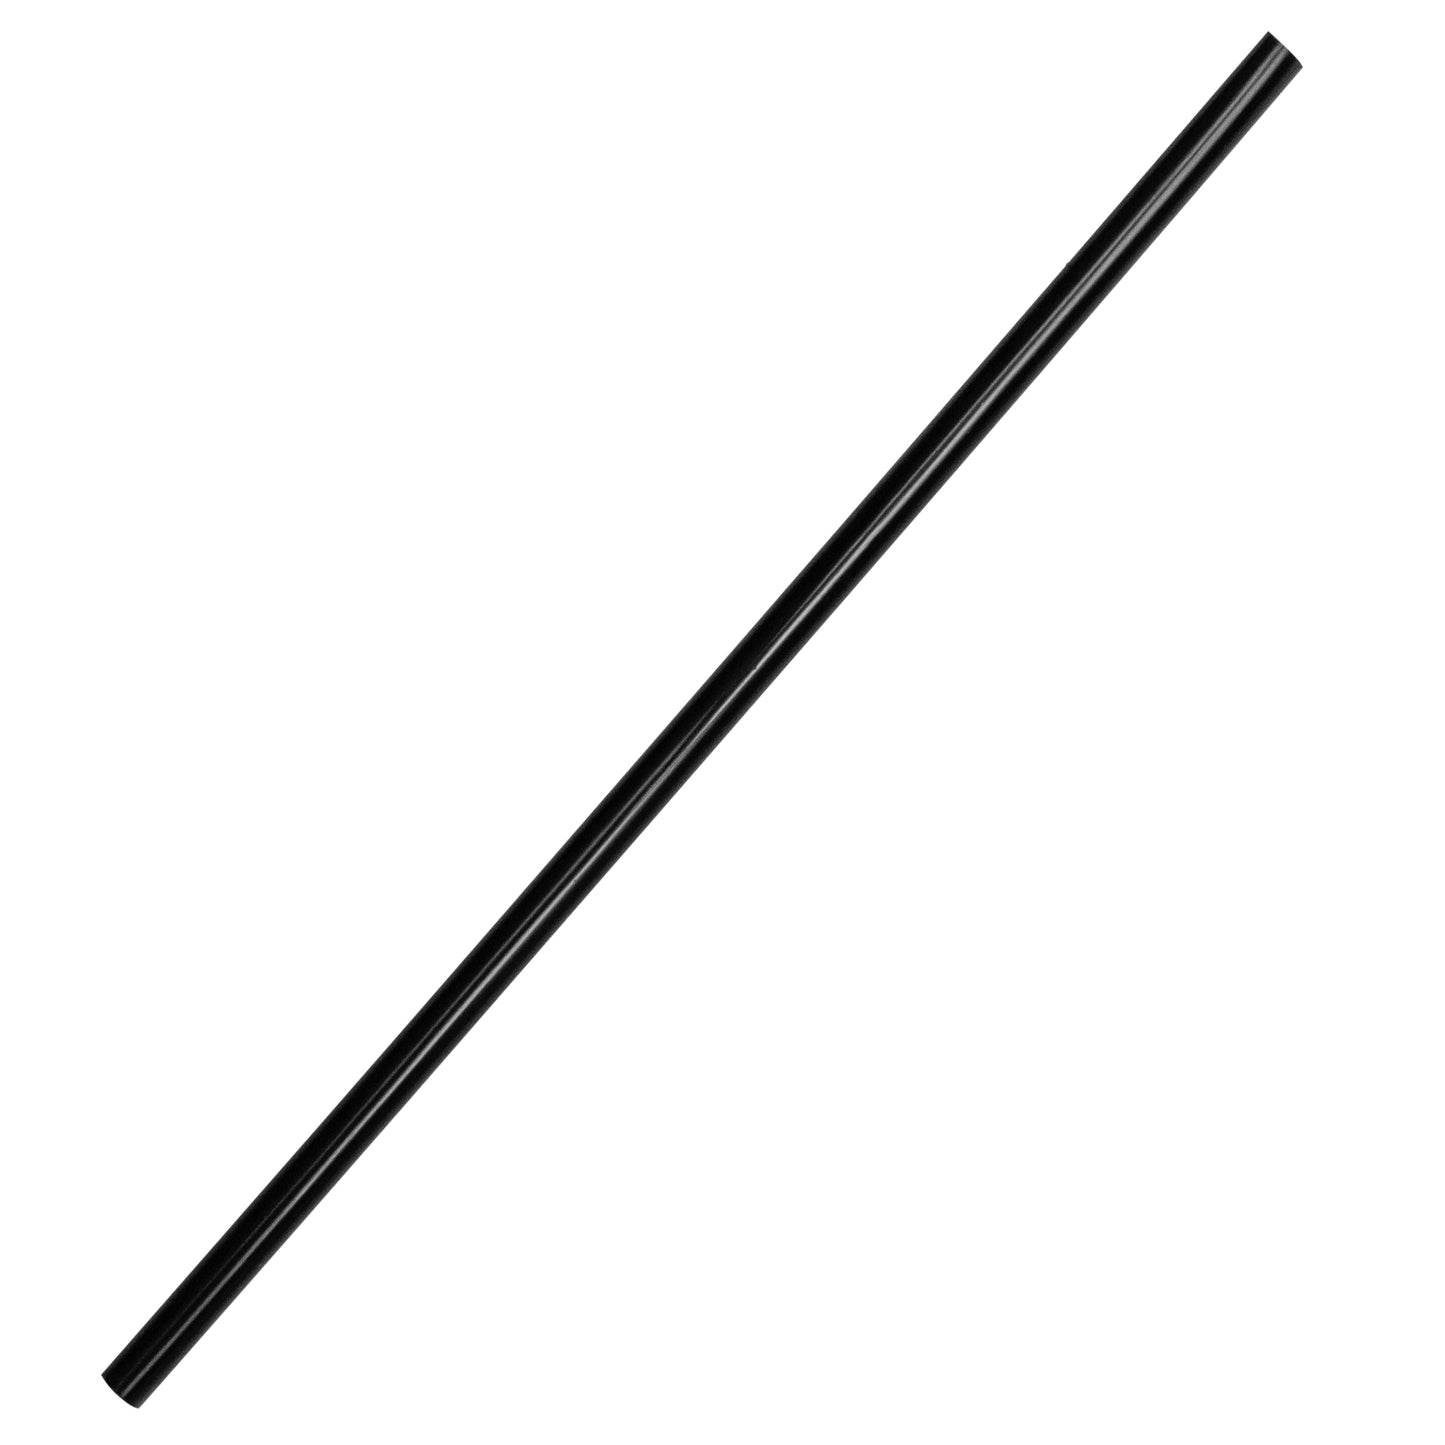 CIAO! 7.75" Jumbo Black Straws (5.9mm Diameter) Paper-Wrapped 6,000/case…